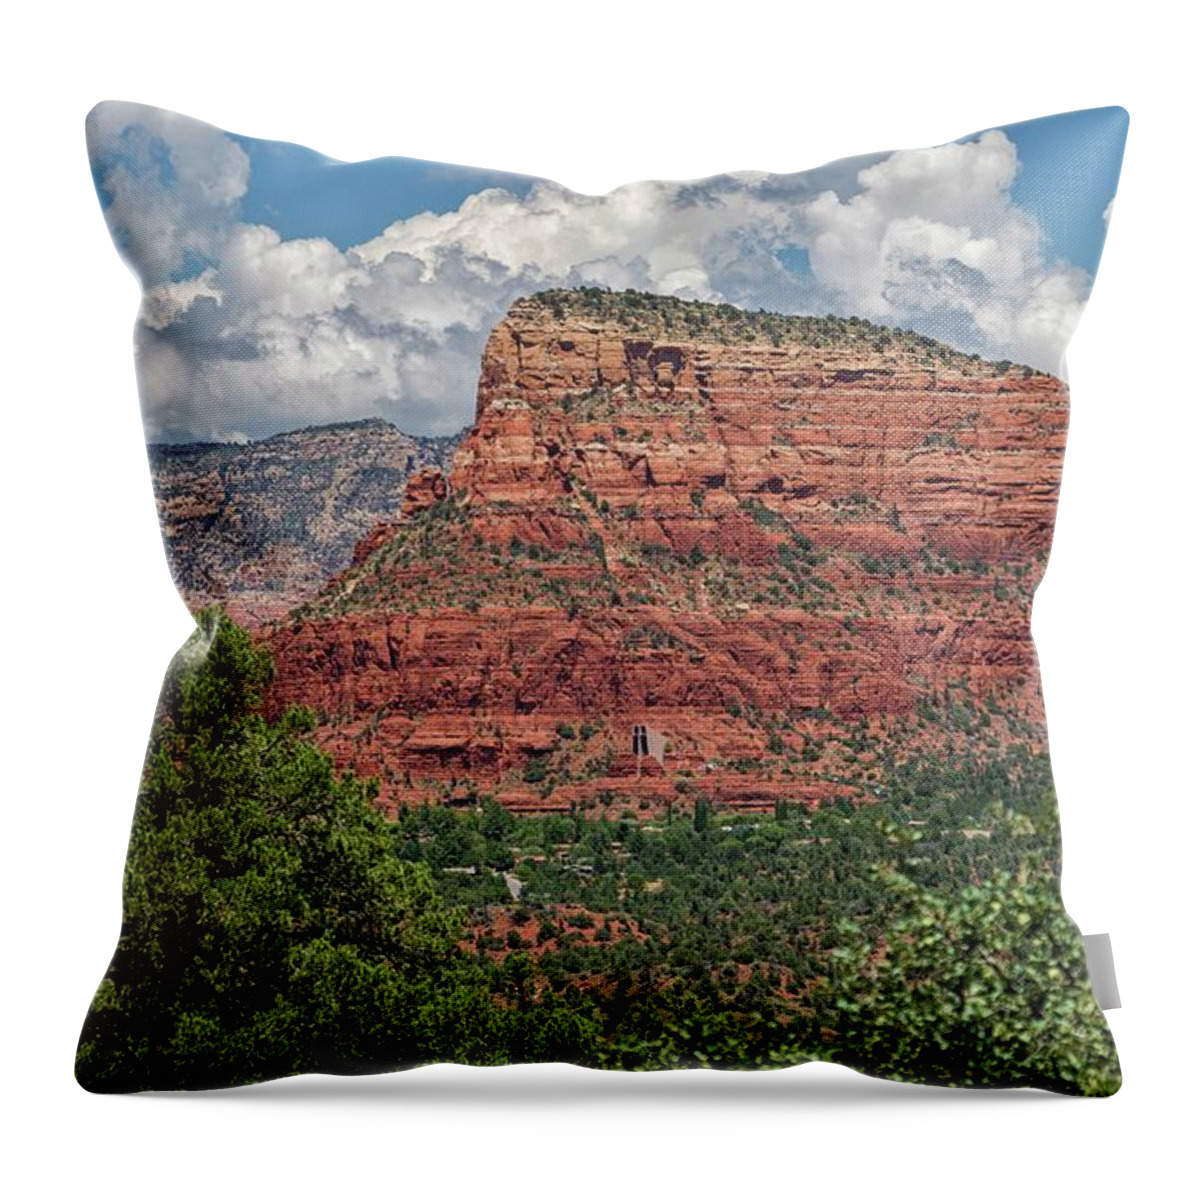 Arizona Throw Pillow featuring the photograph Sedona Red Rocks 3 by Marisa Geraghty Photography